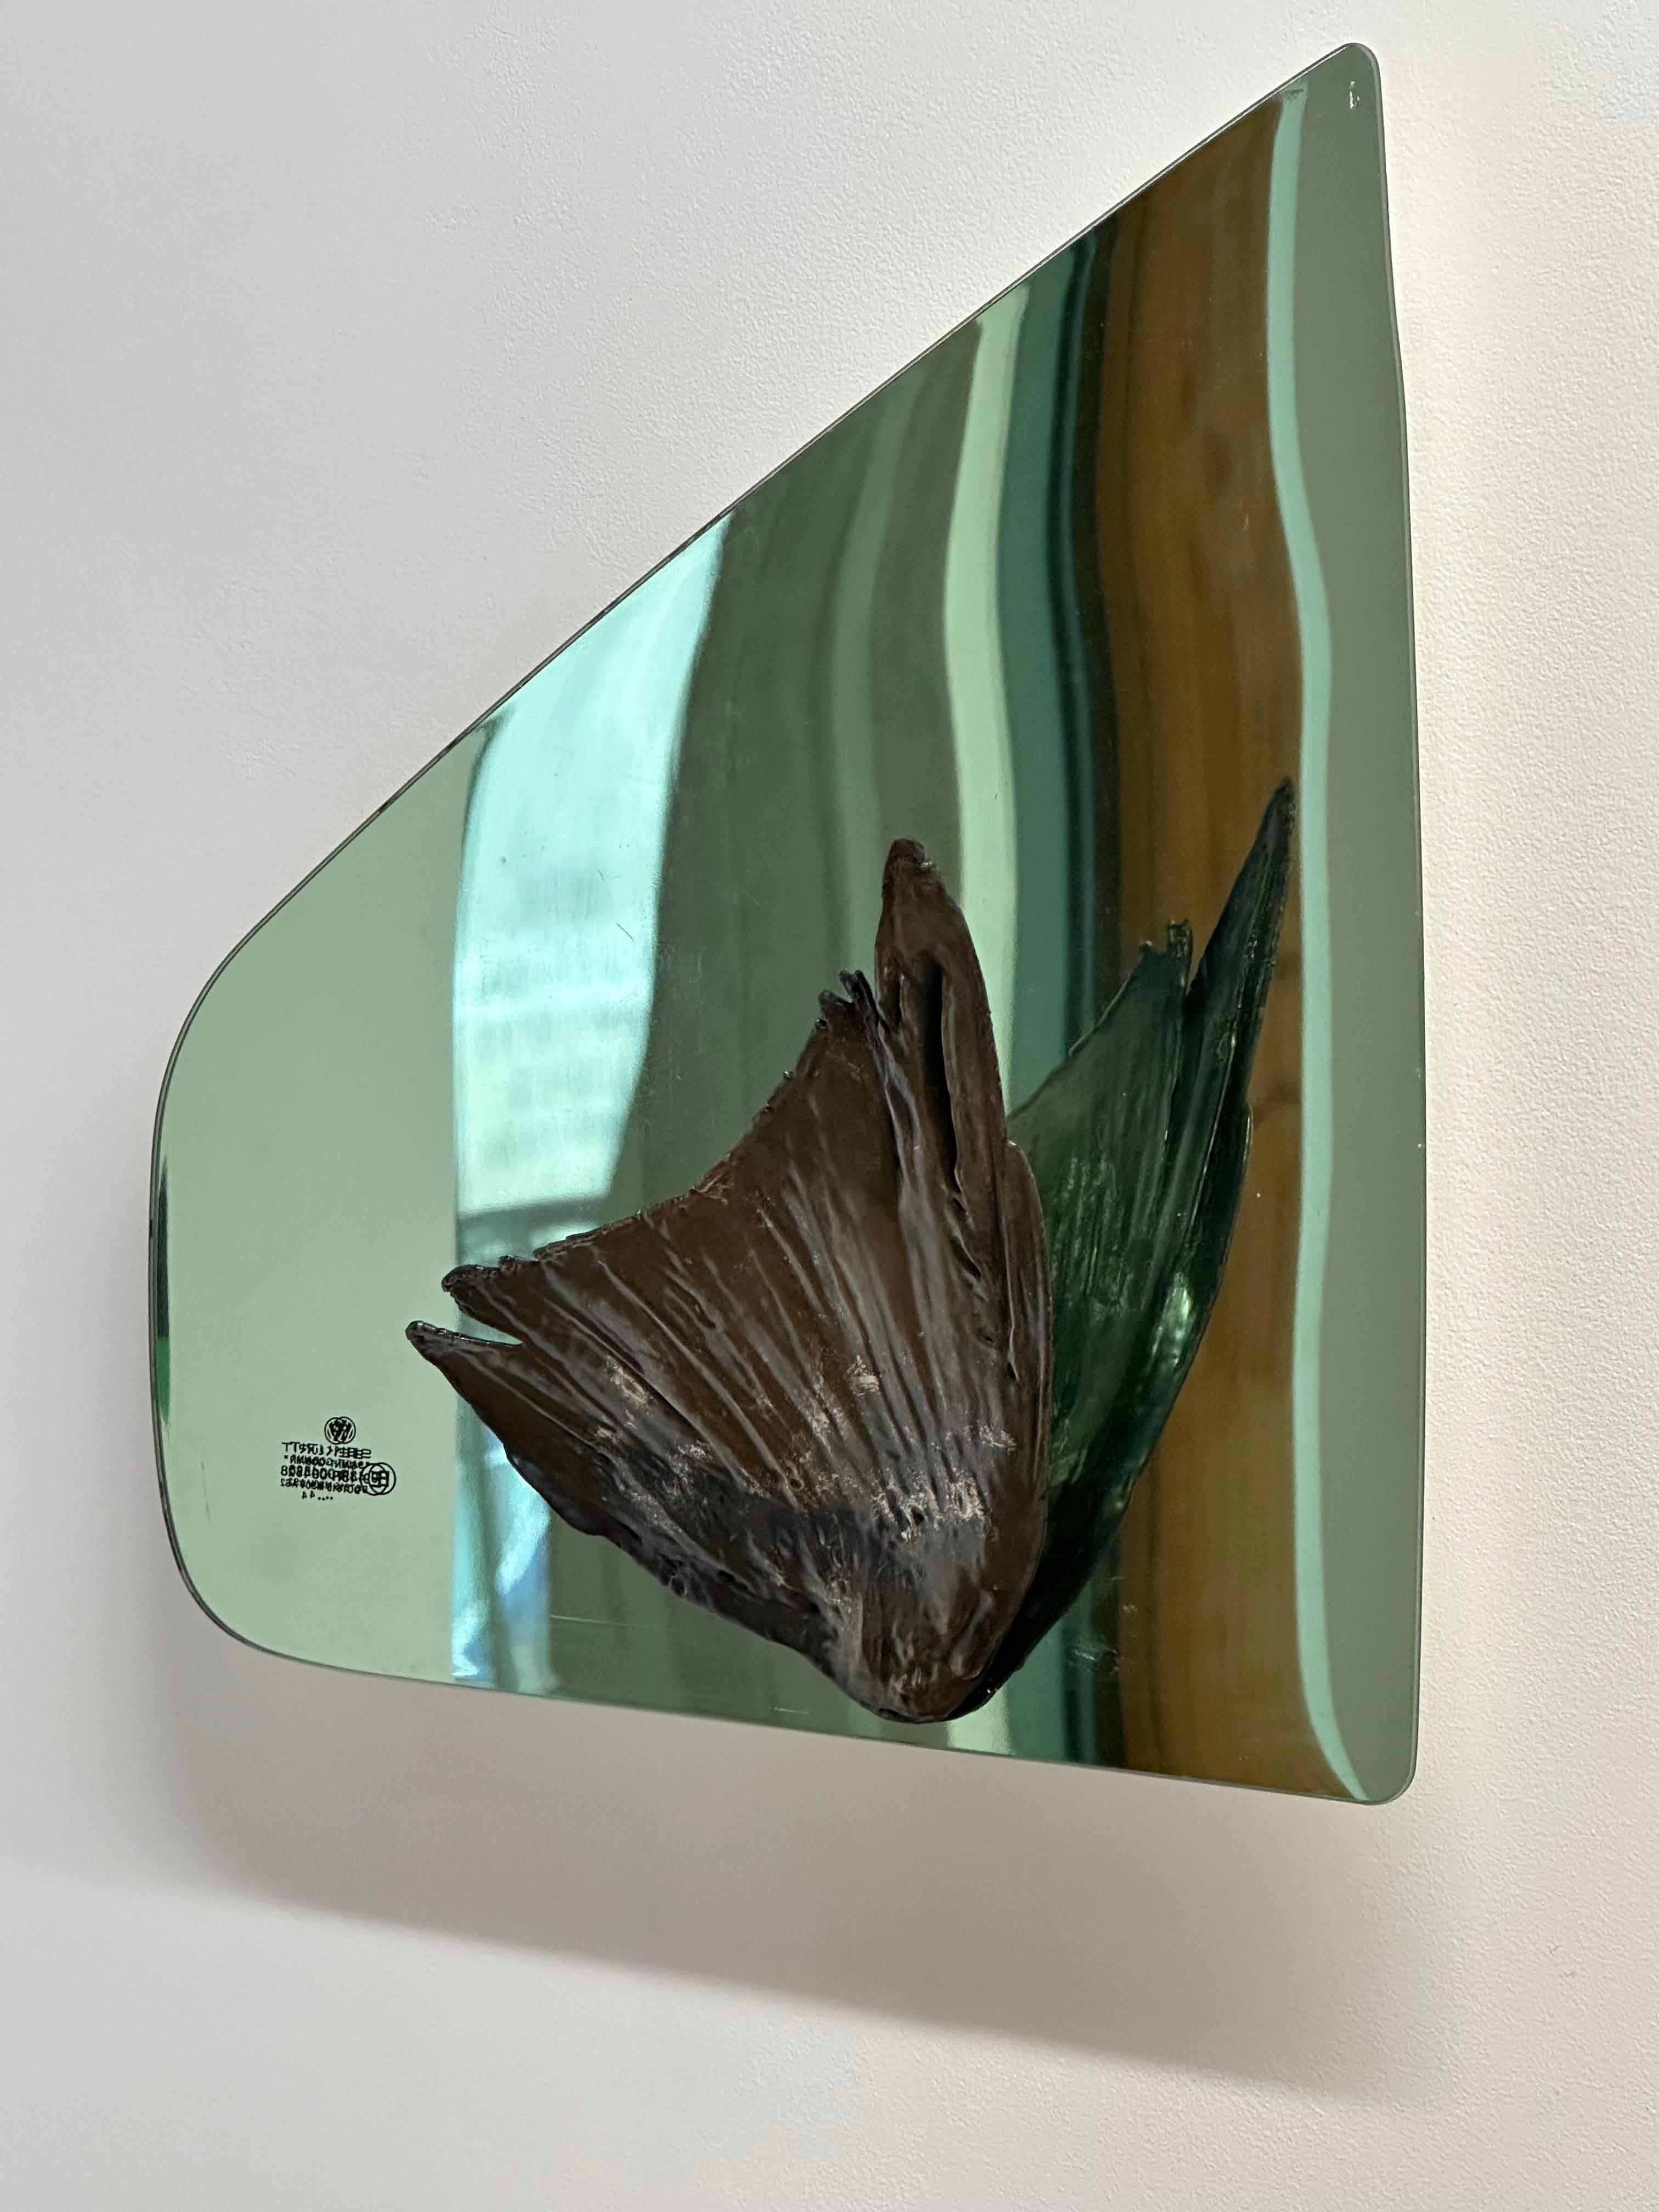 In this wall-mounted sculpture, a copper and nickel-plated crow's wing extends out from a shaped piece of glass, a window from a 1990 Volkswagen Passat mirrored with white gold leaf.

Richard Klein has utilized found objects in his sculptural work